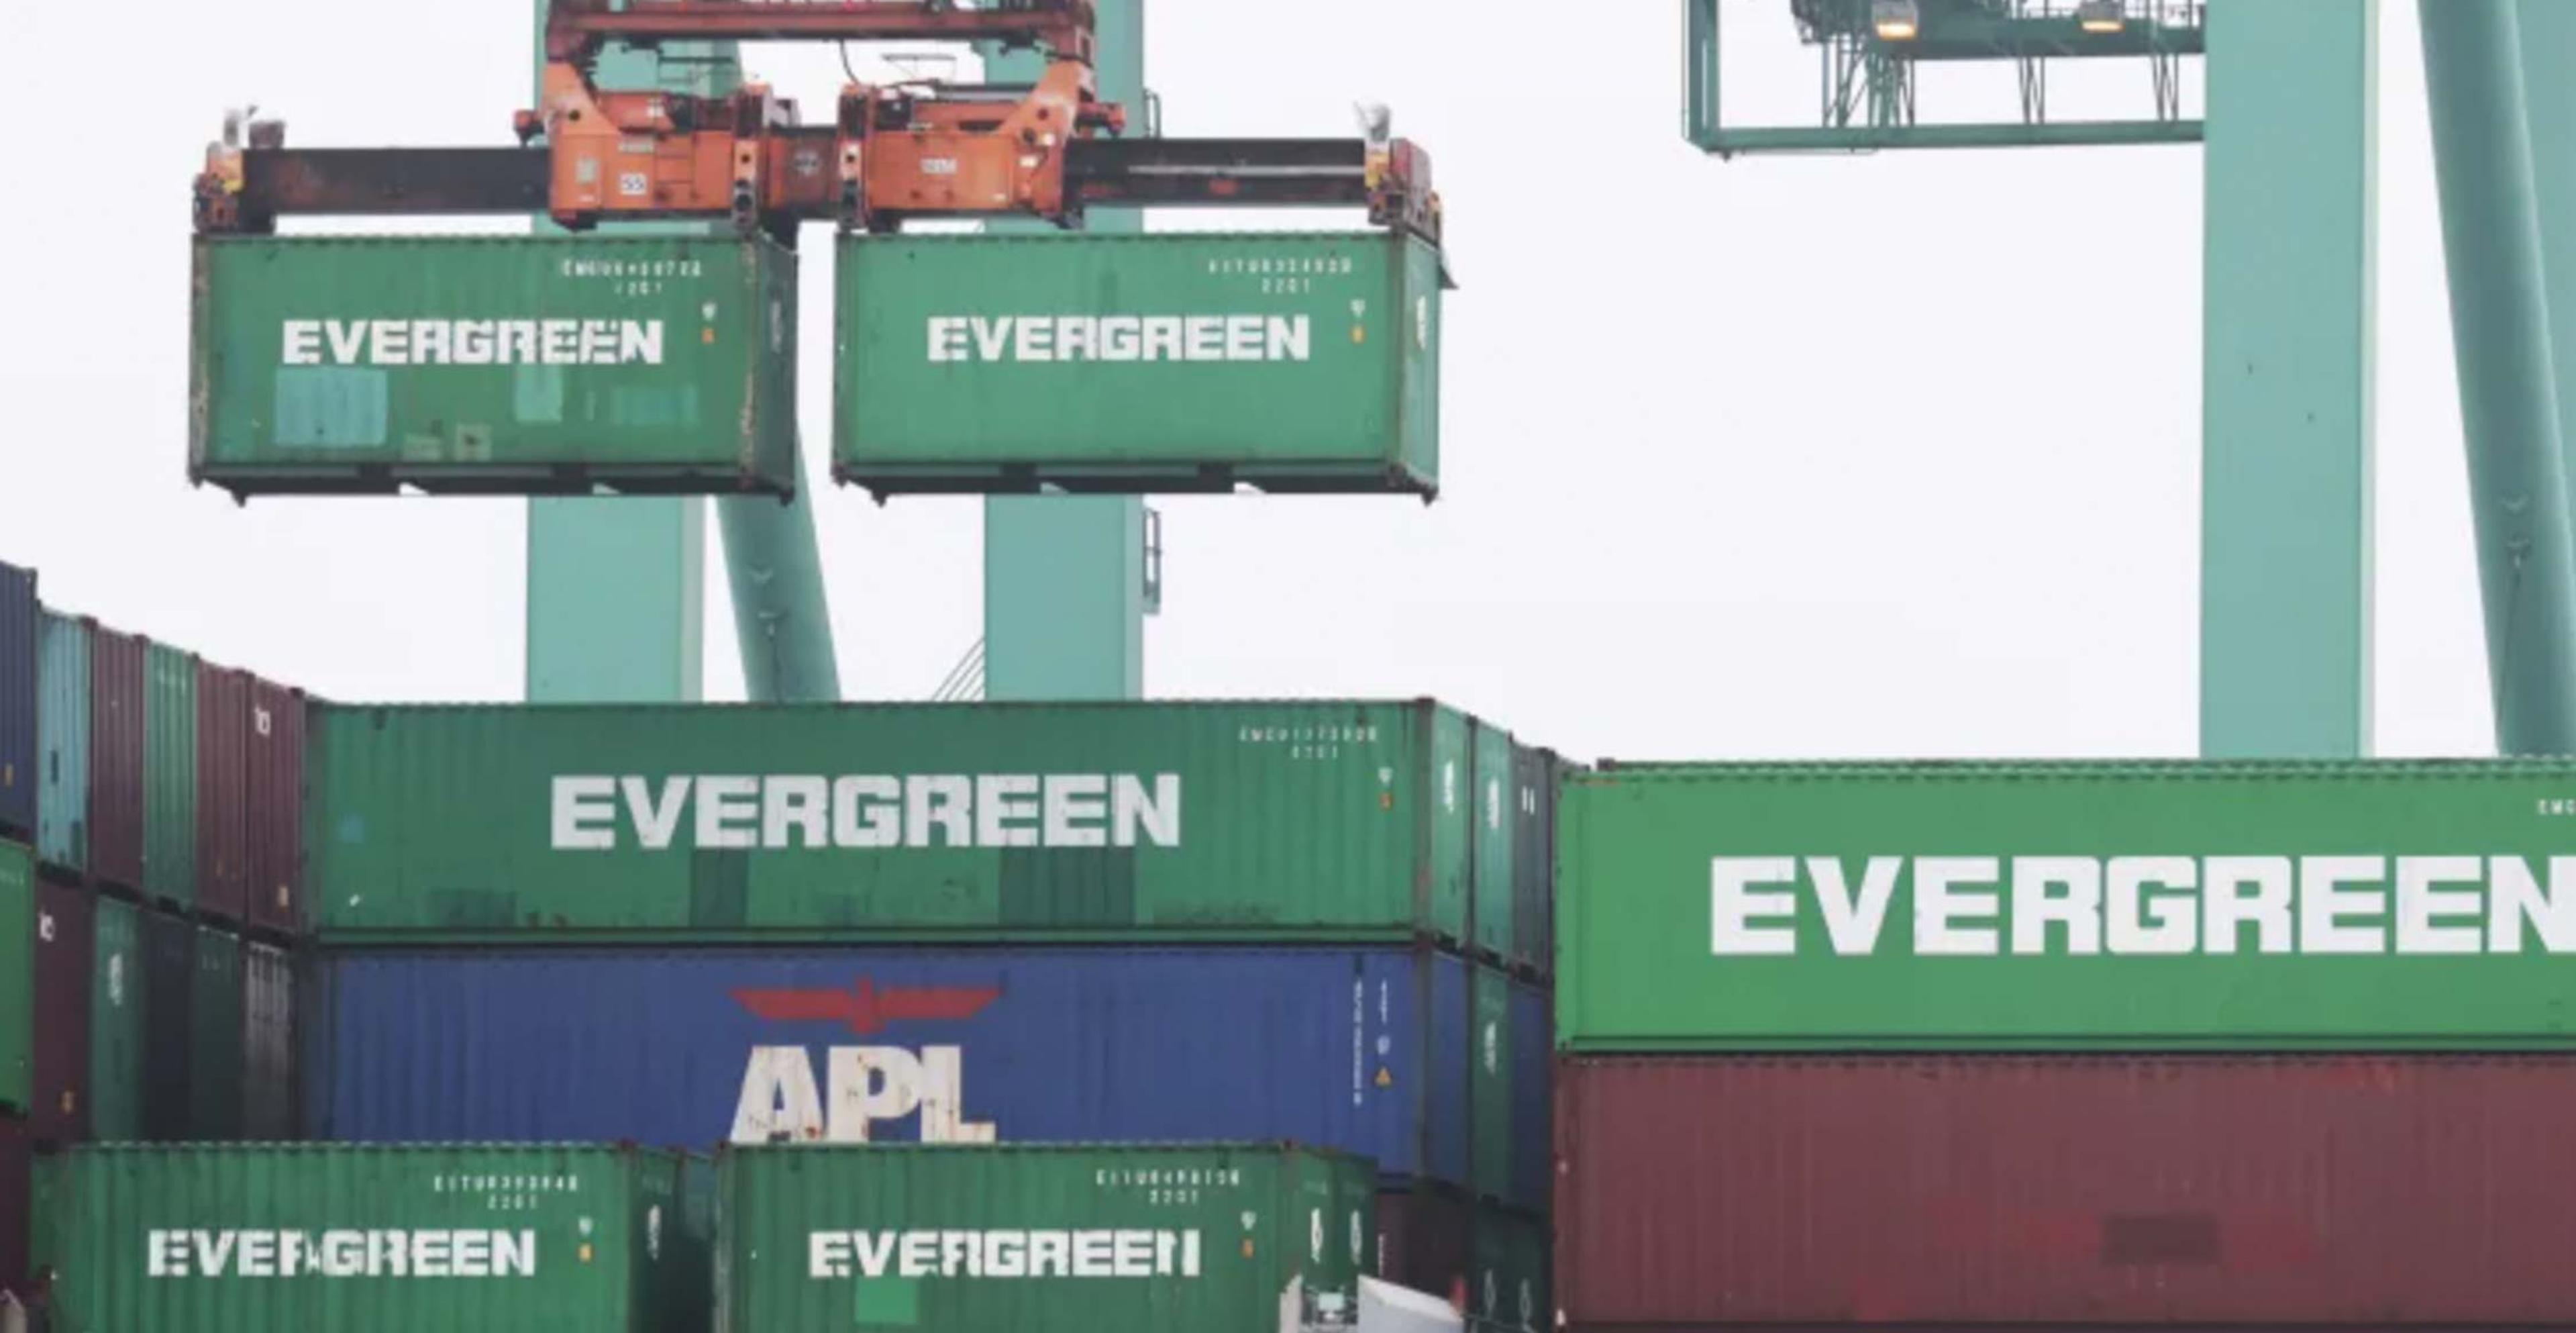 Evergreen shipping containers being unloaded in west coast ports